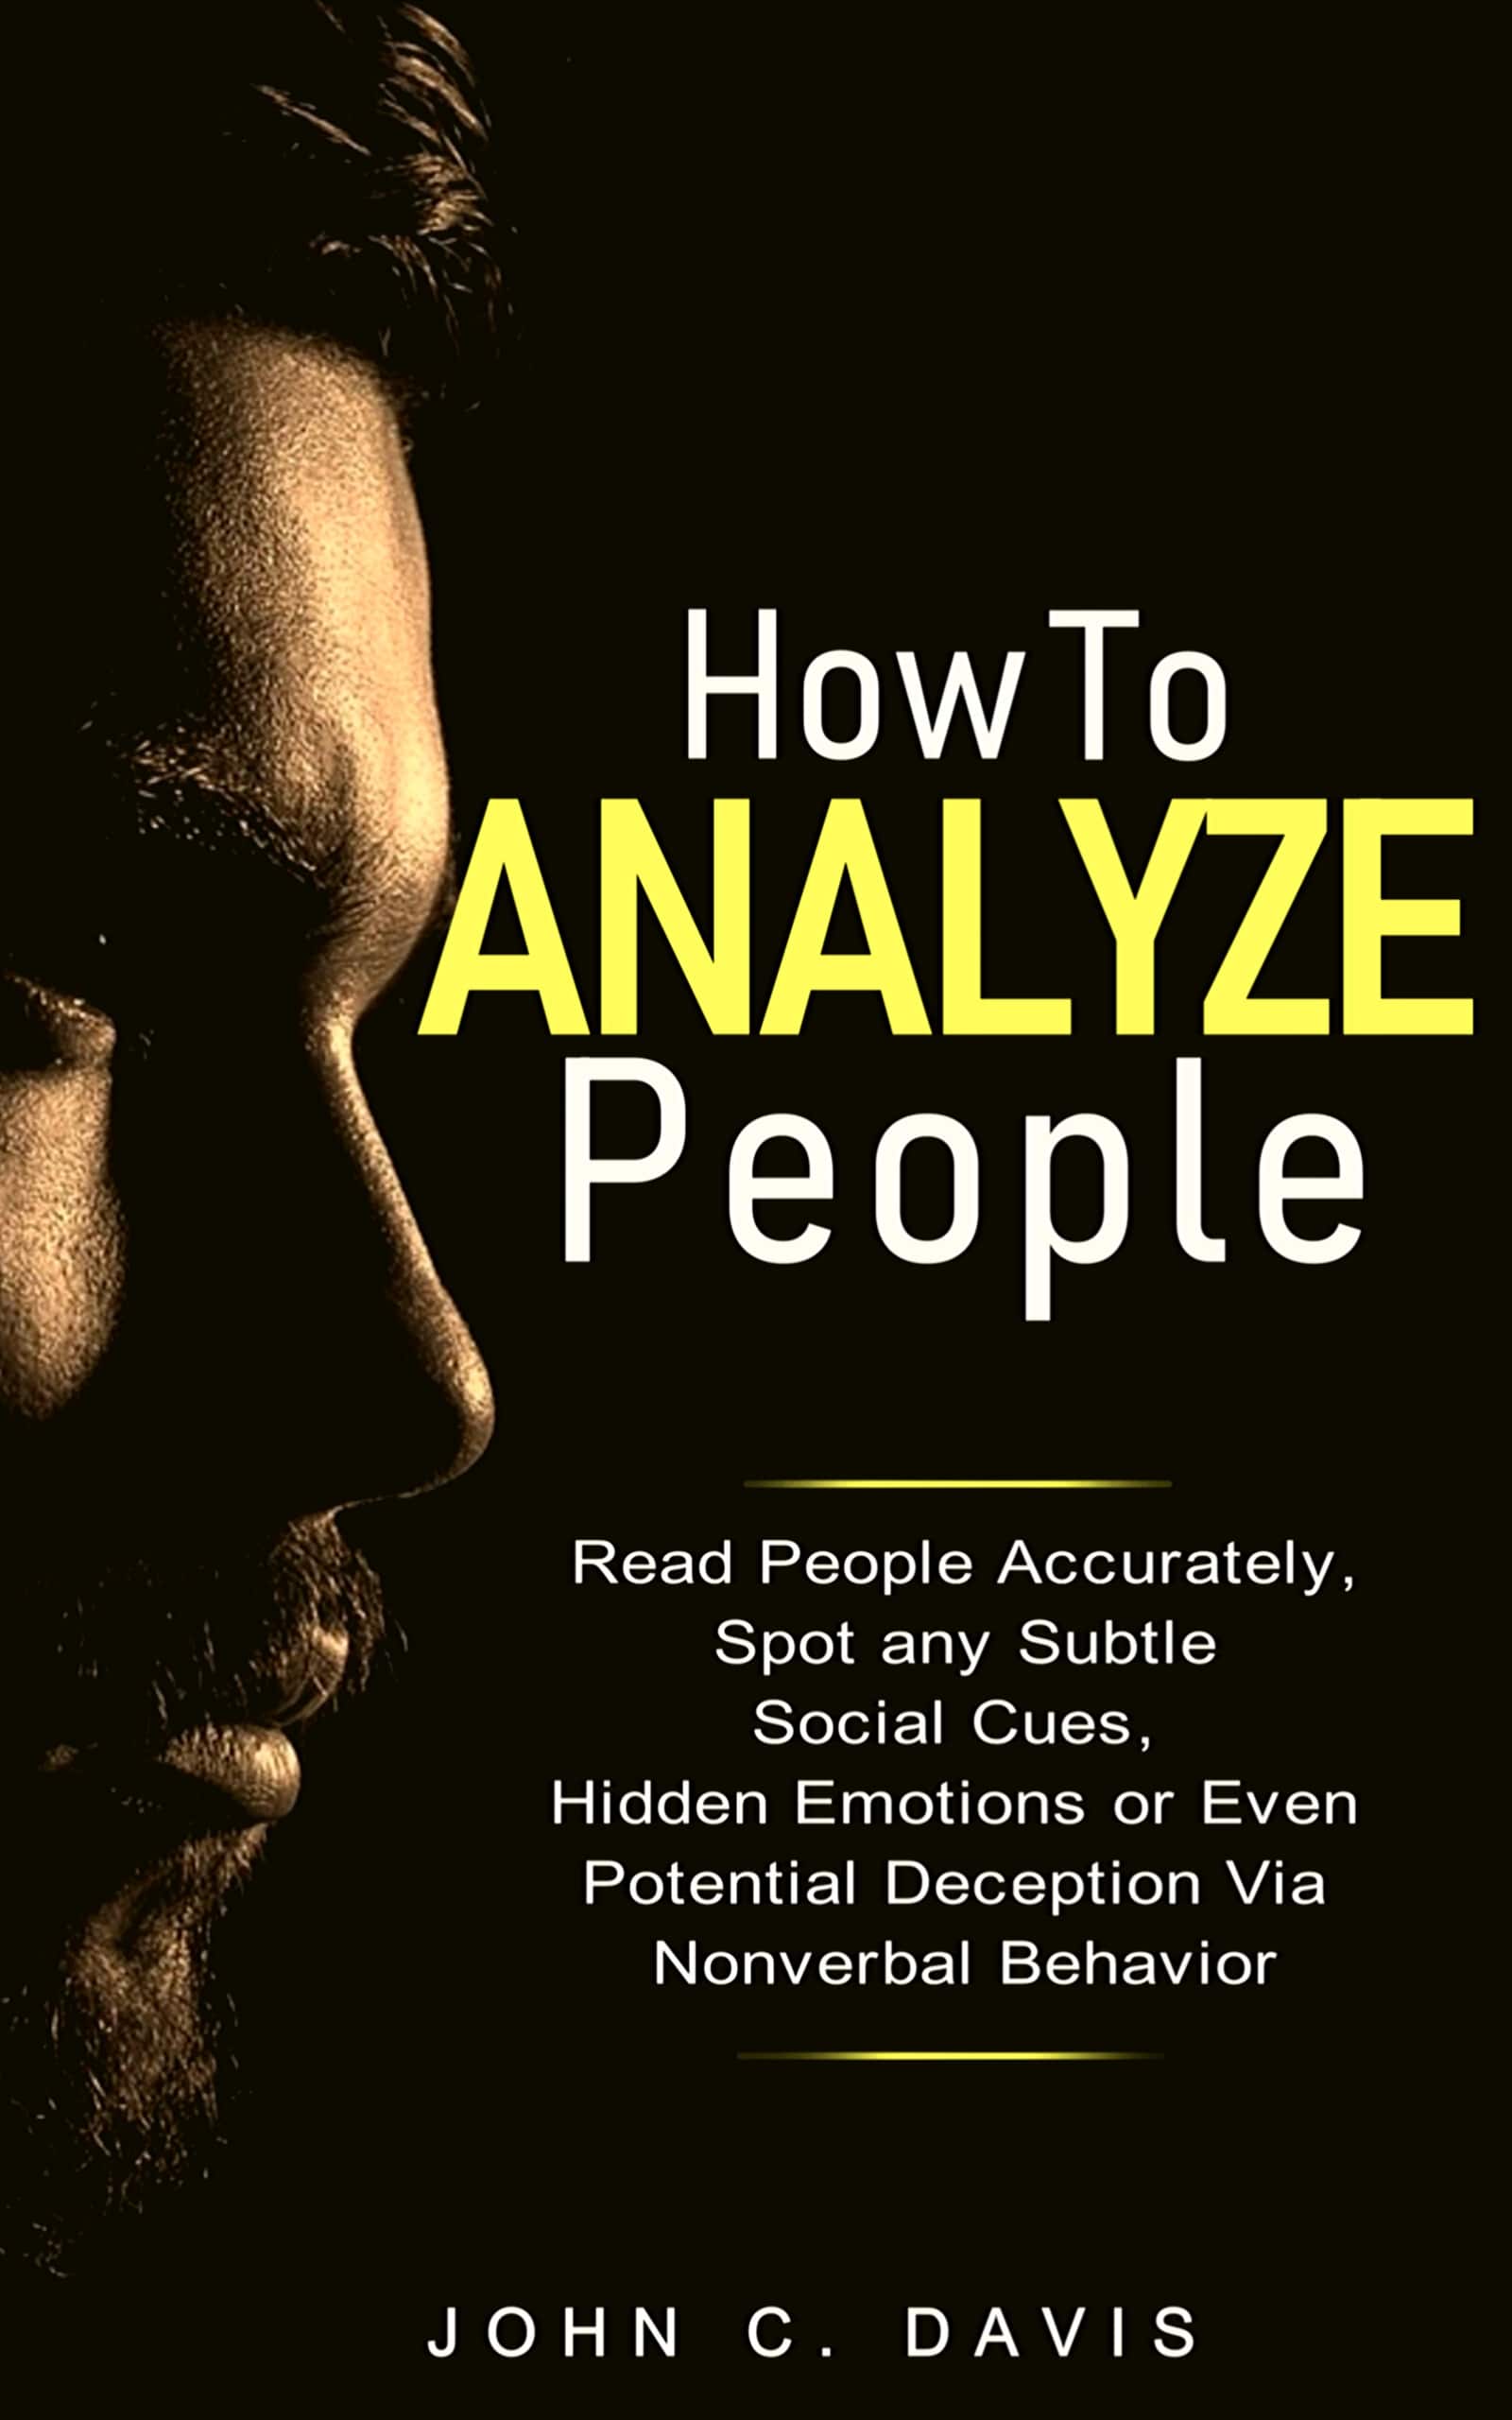 FREE: How To Analyze people: The Revealing Power of Facial Expressions – How To Read People Accurately and Spot any Subtle Social Cues, Repressed Emotions or Even Potential Deception via Nonverbal Behavior by John C. Davis